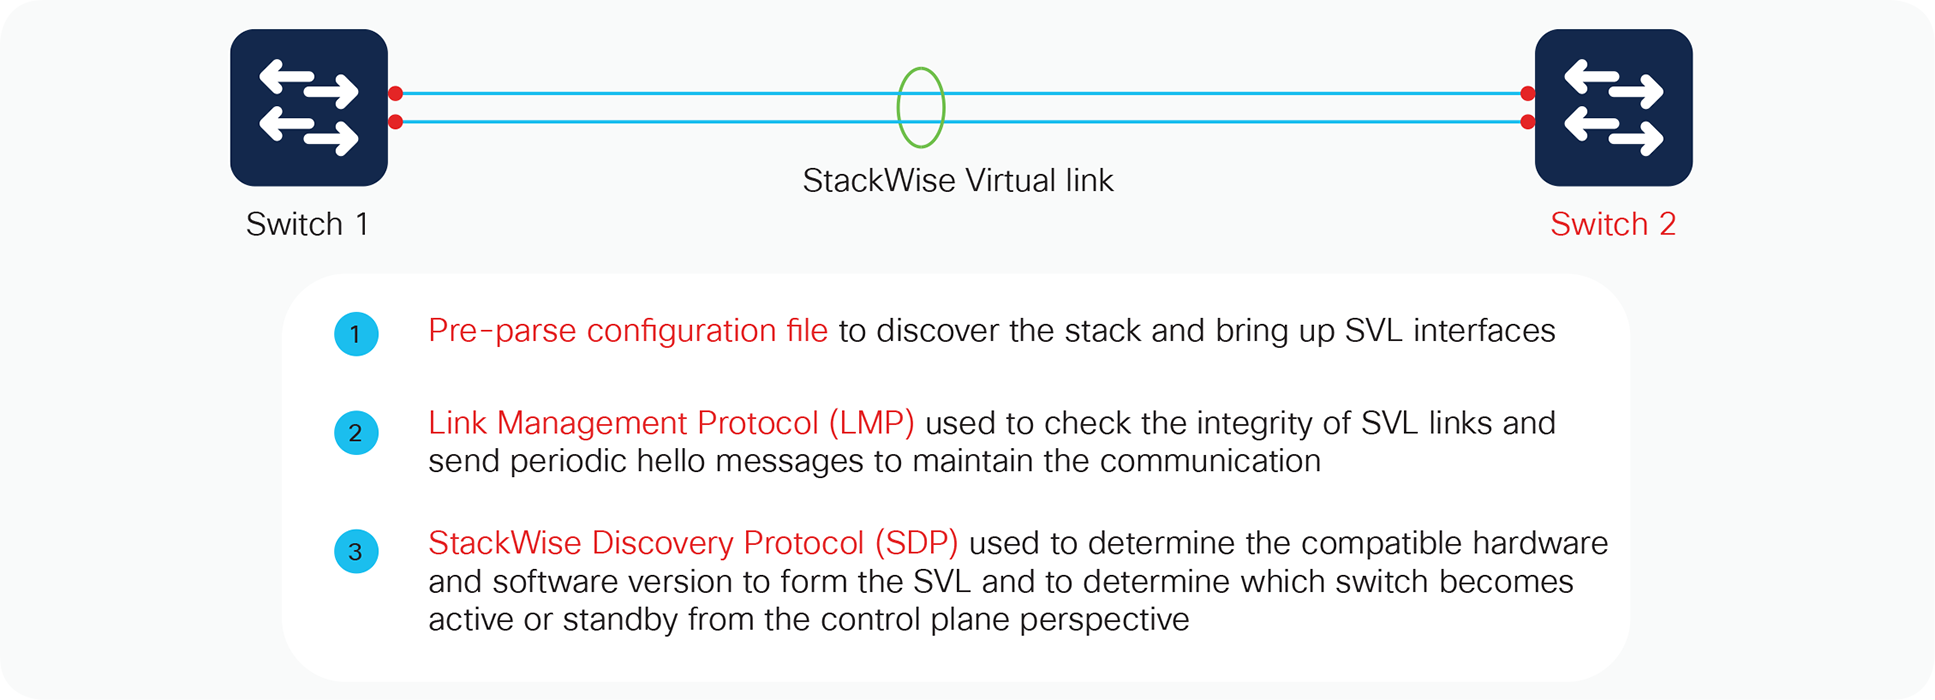 StackWise Virtual link initialization